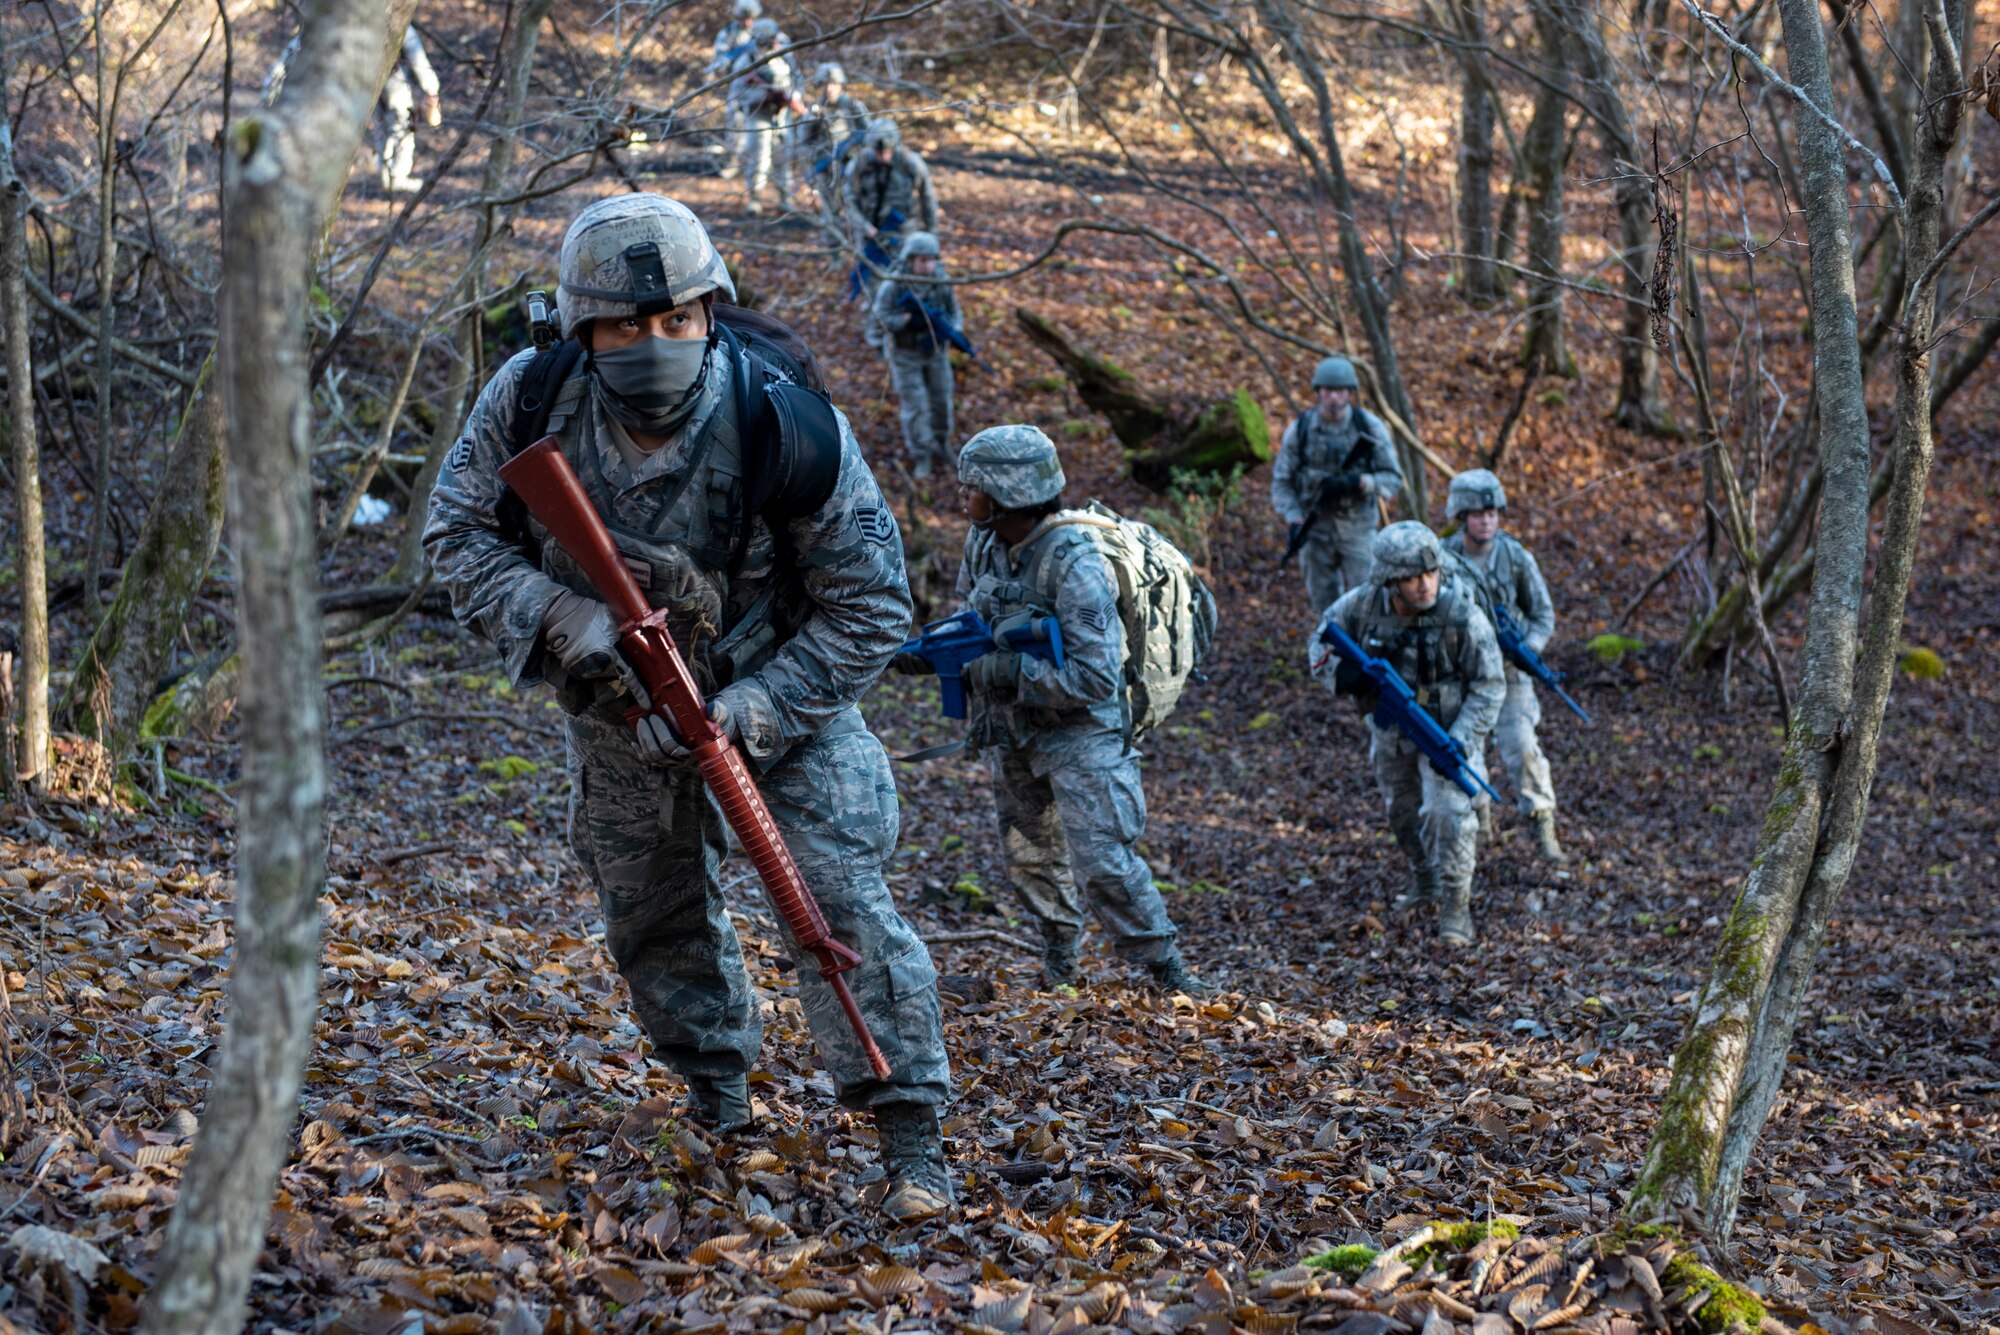 Airmen from the 374th Security Forces Squadron make their way up a hill during a field training exercise at Camp Fuji, Japan, Nov. 8, 2018.